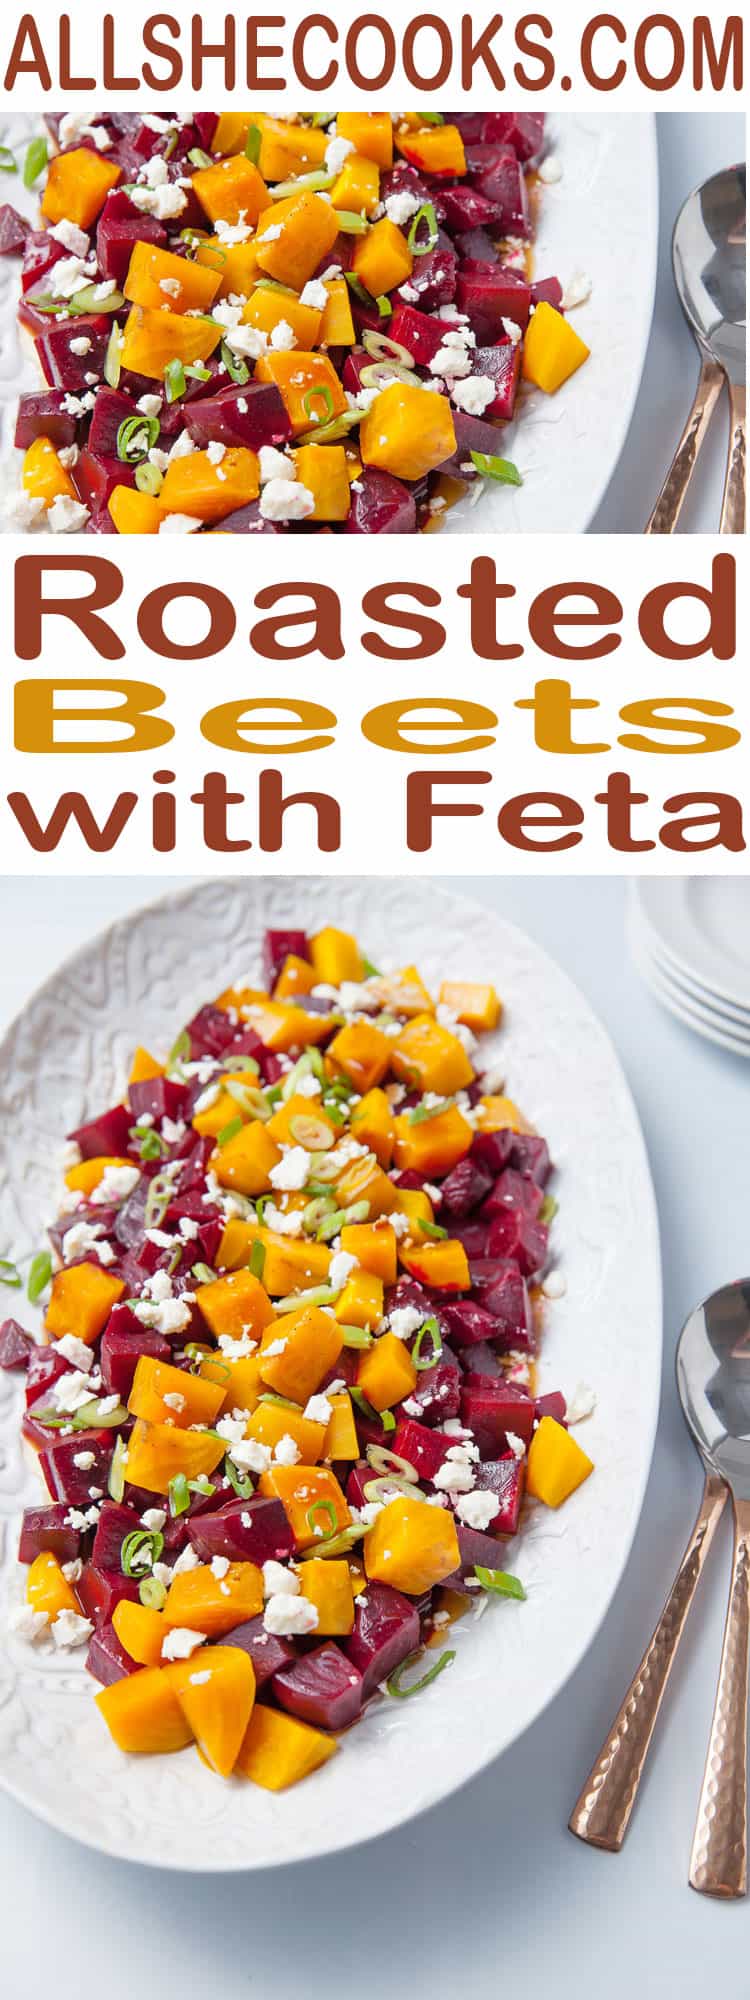 Roasted Beets with Feta side dish recipe. Serve this delicious root vegetables side dish up for your next family dinner. #beets #rootveggies #colorfulfood